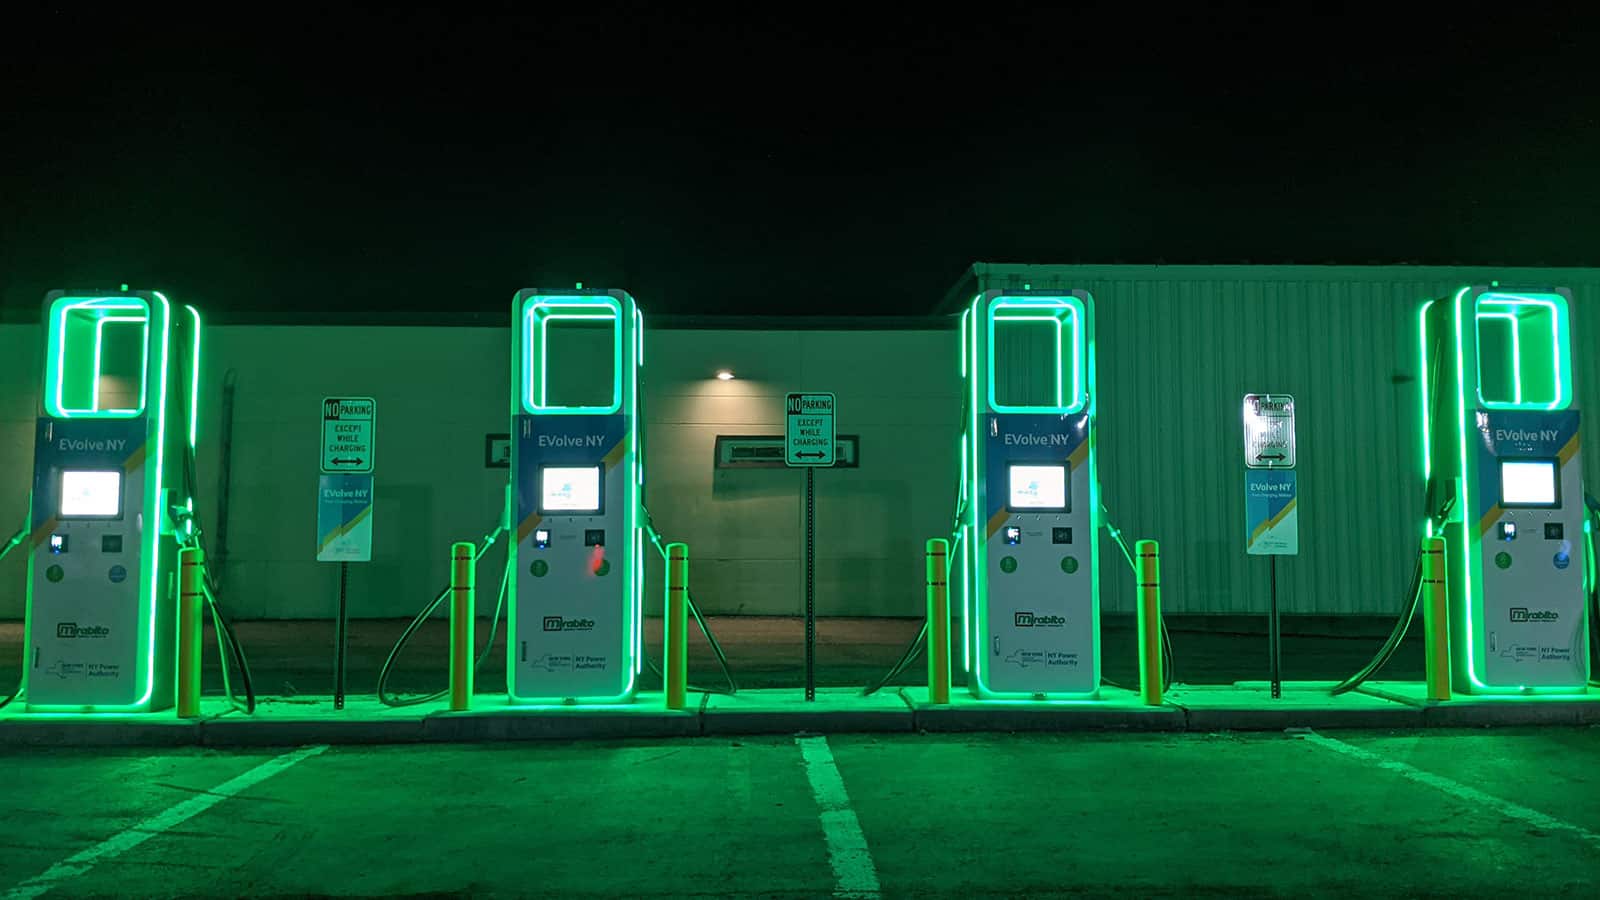 image showing you can find an Electrify America charging station at night easily as it's glowing green